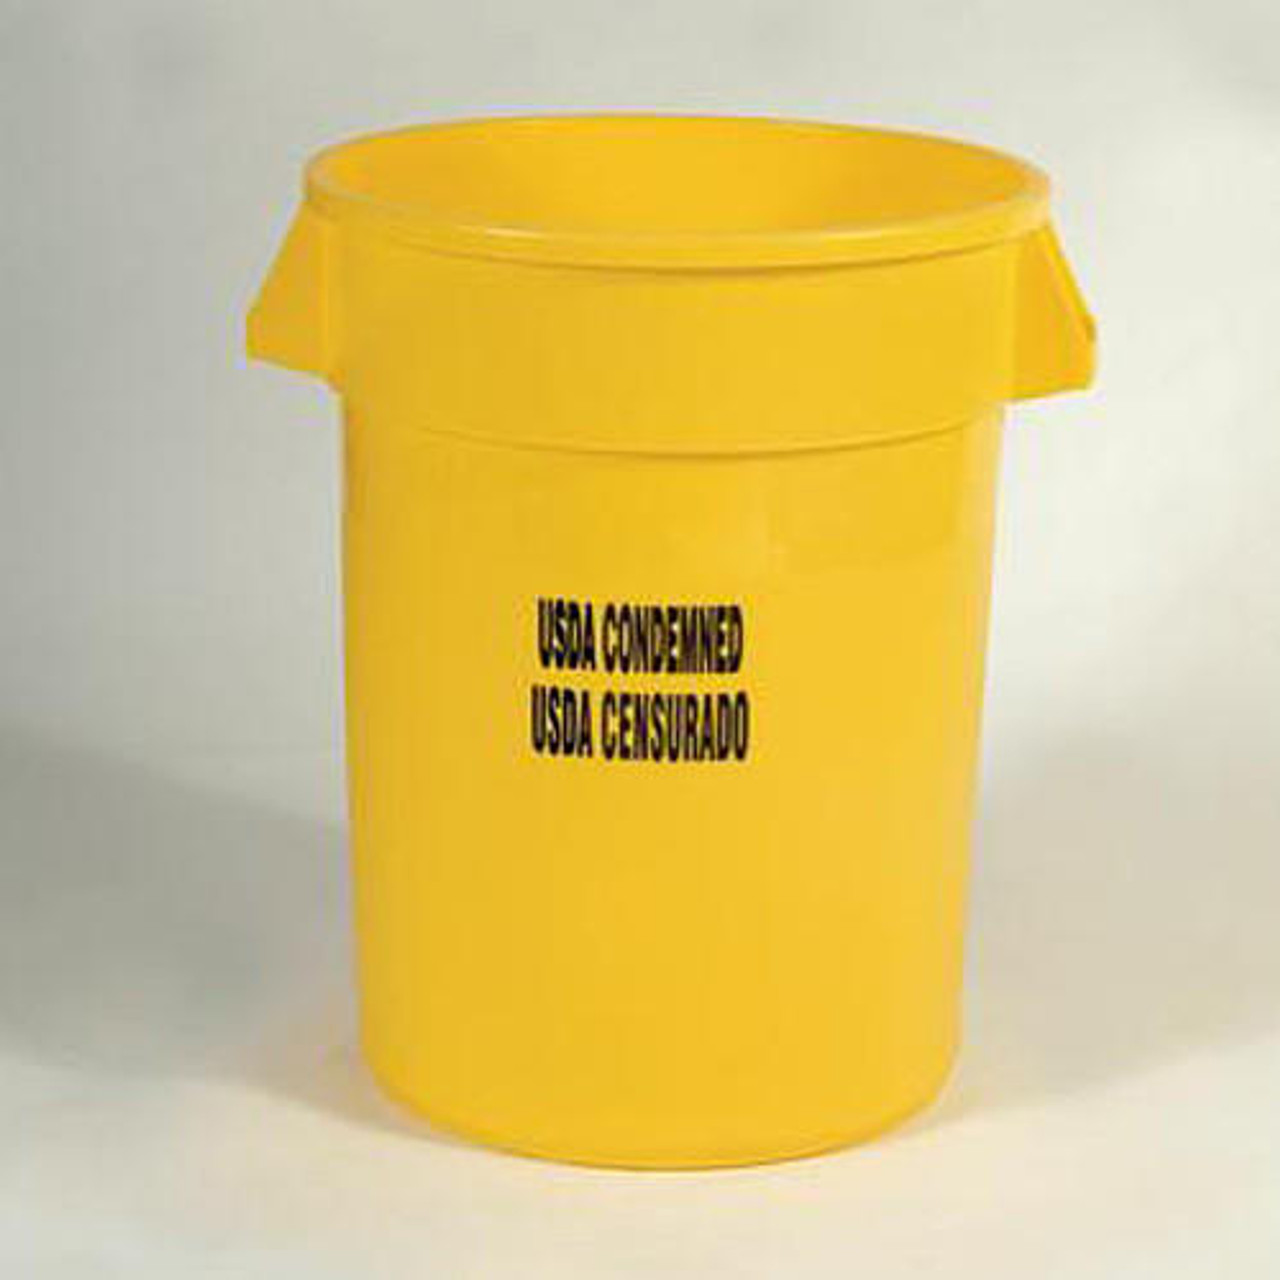 https://cdn11.bigcommerce.com/s-36yz7qwnyo/images/stencil/1280x1280/products/9364/56825/newell-rubbermaid-brute-44-gal-trash-bin-without-lid-and-usda-condemned-print-yellow__62355.1683097281.jpg?c=1